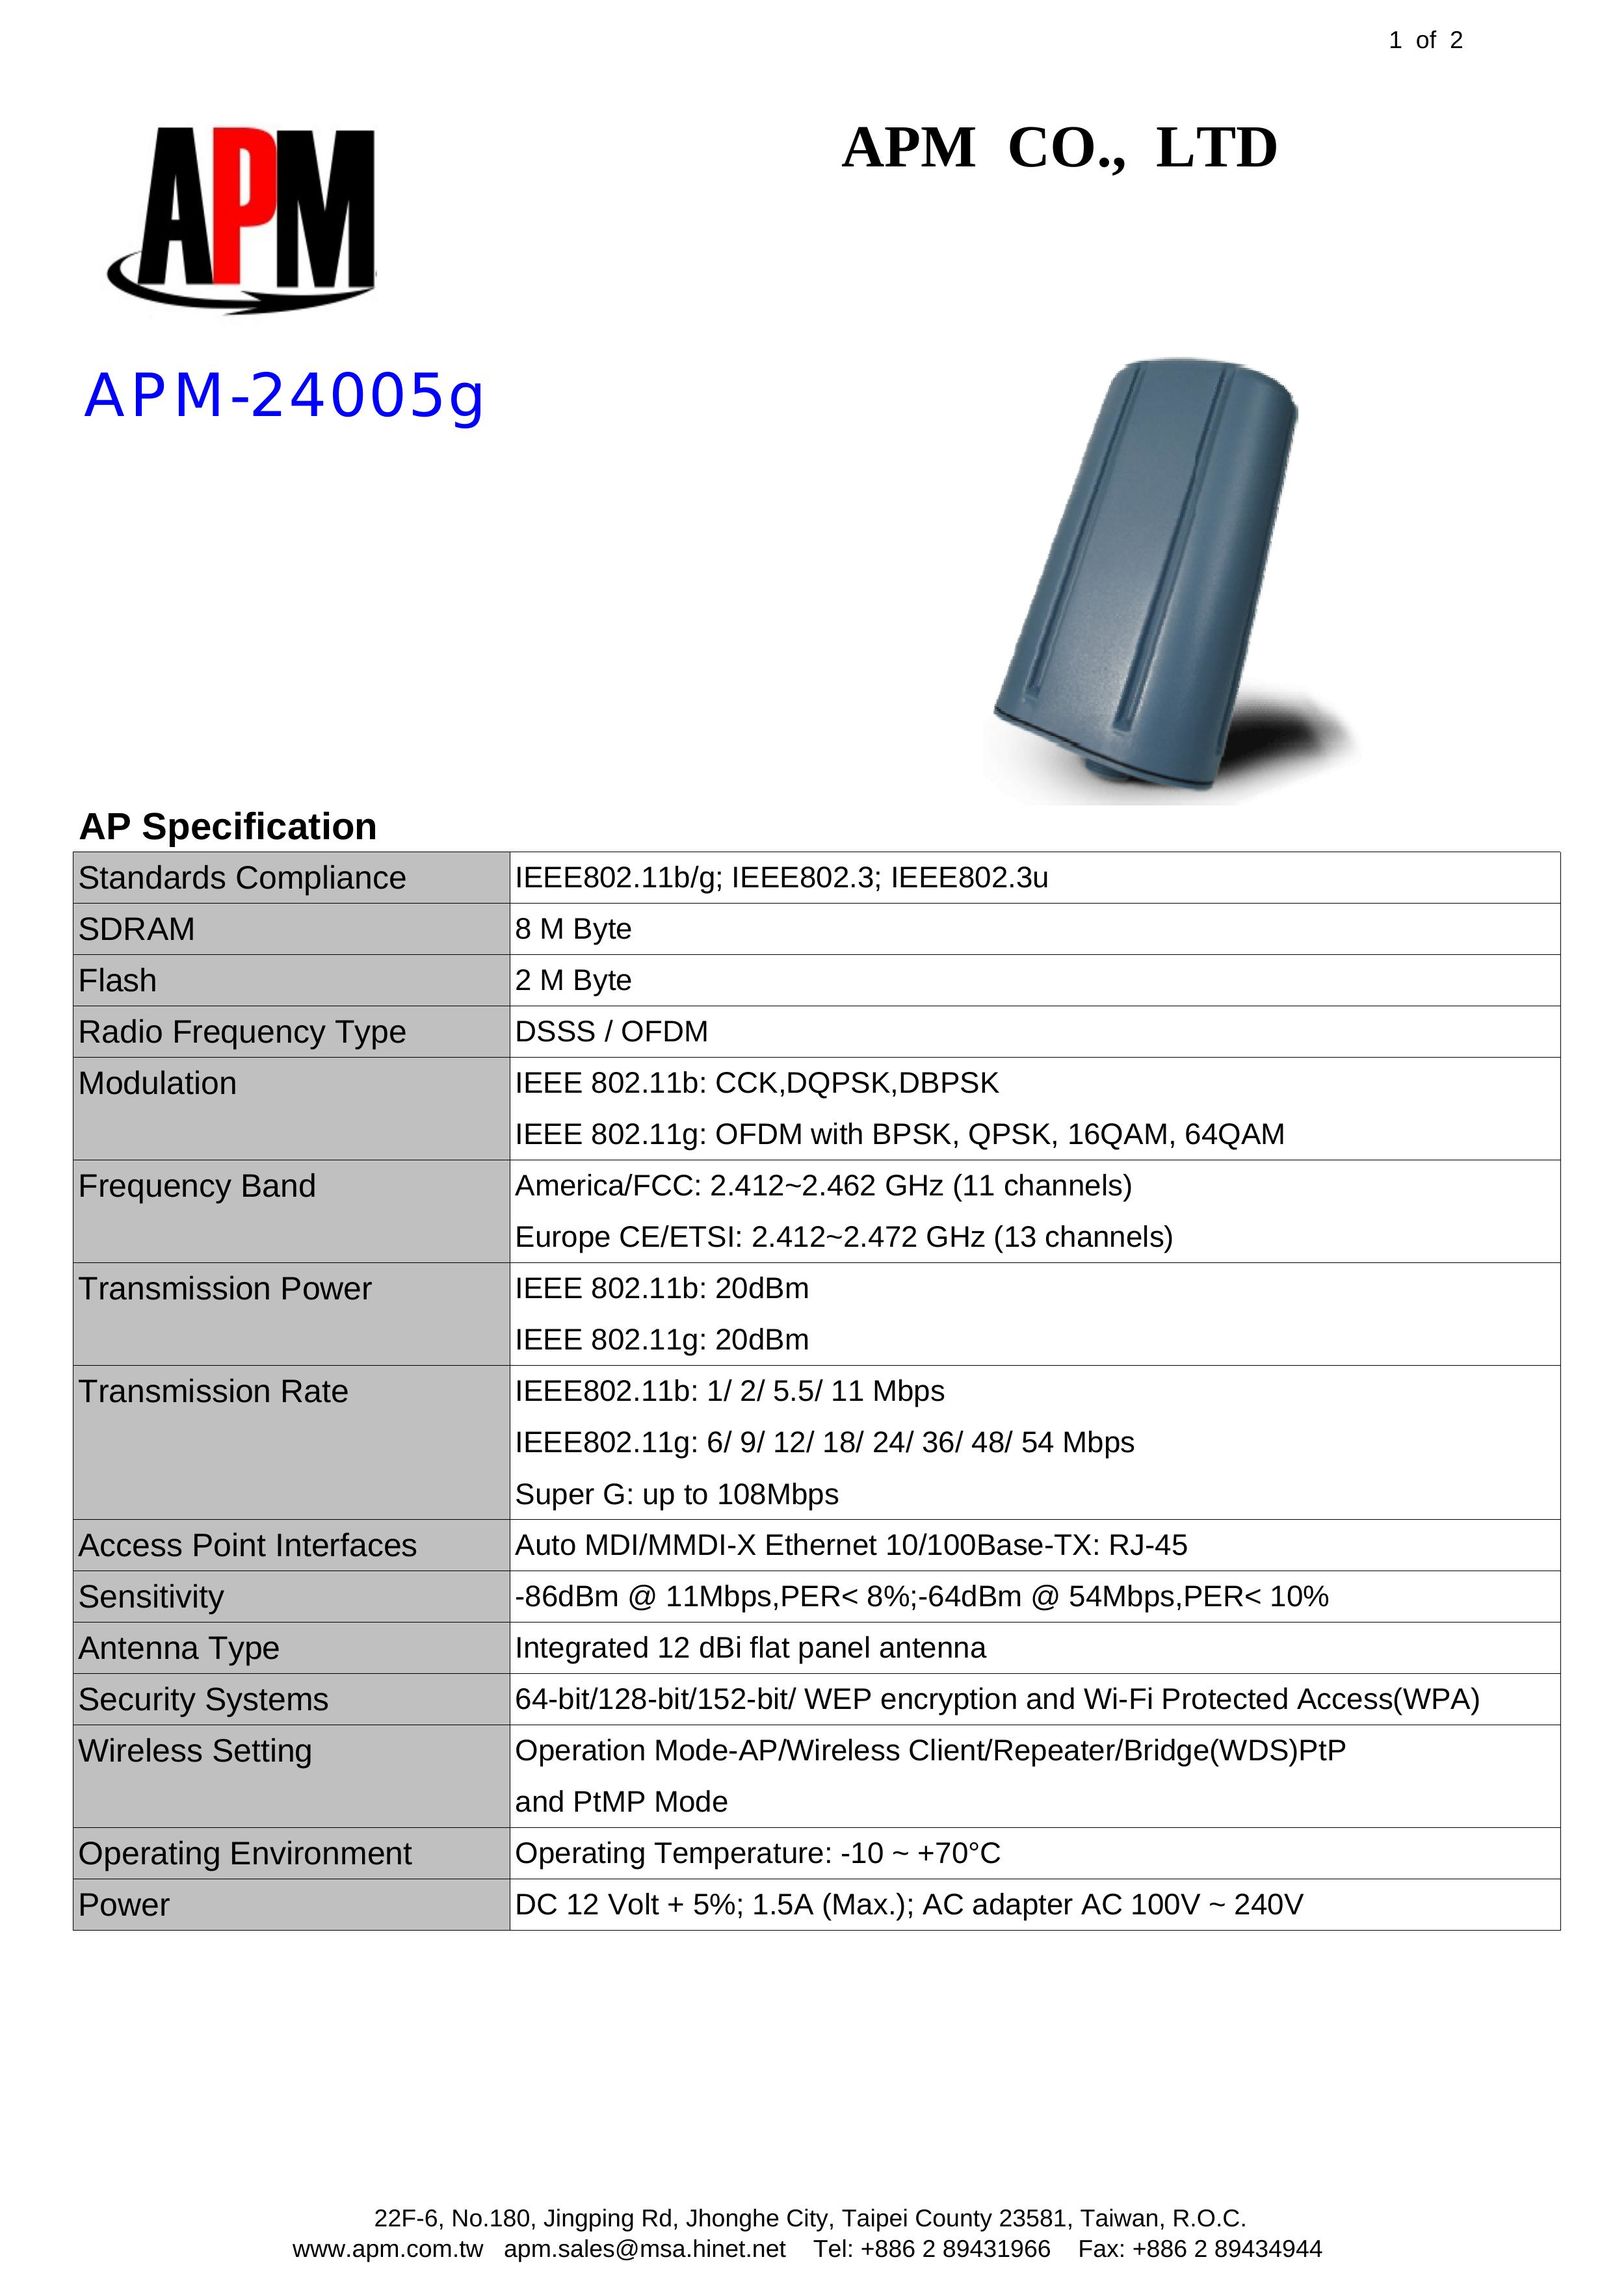 APM -24005G Network Router User Manual